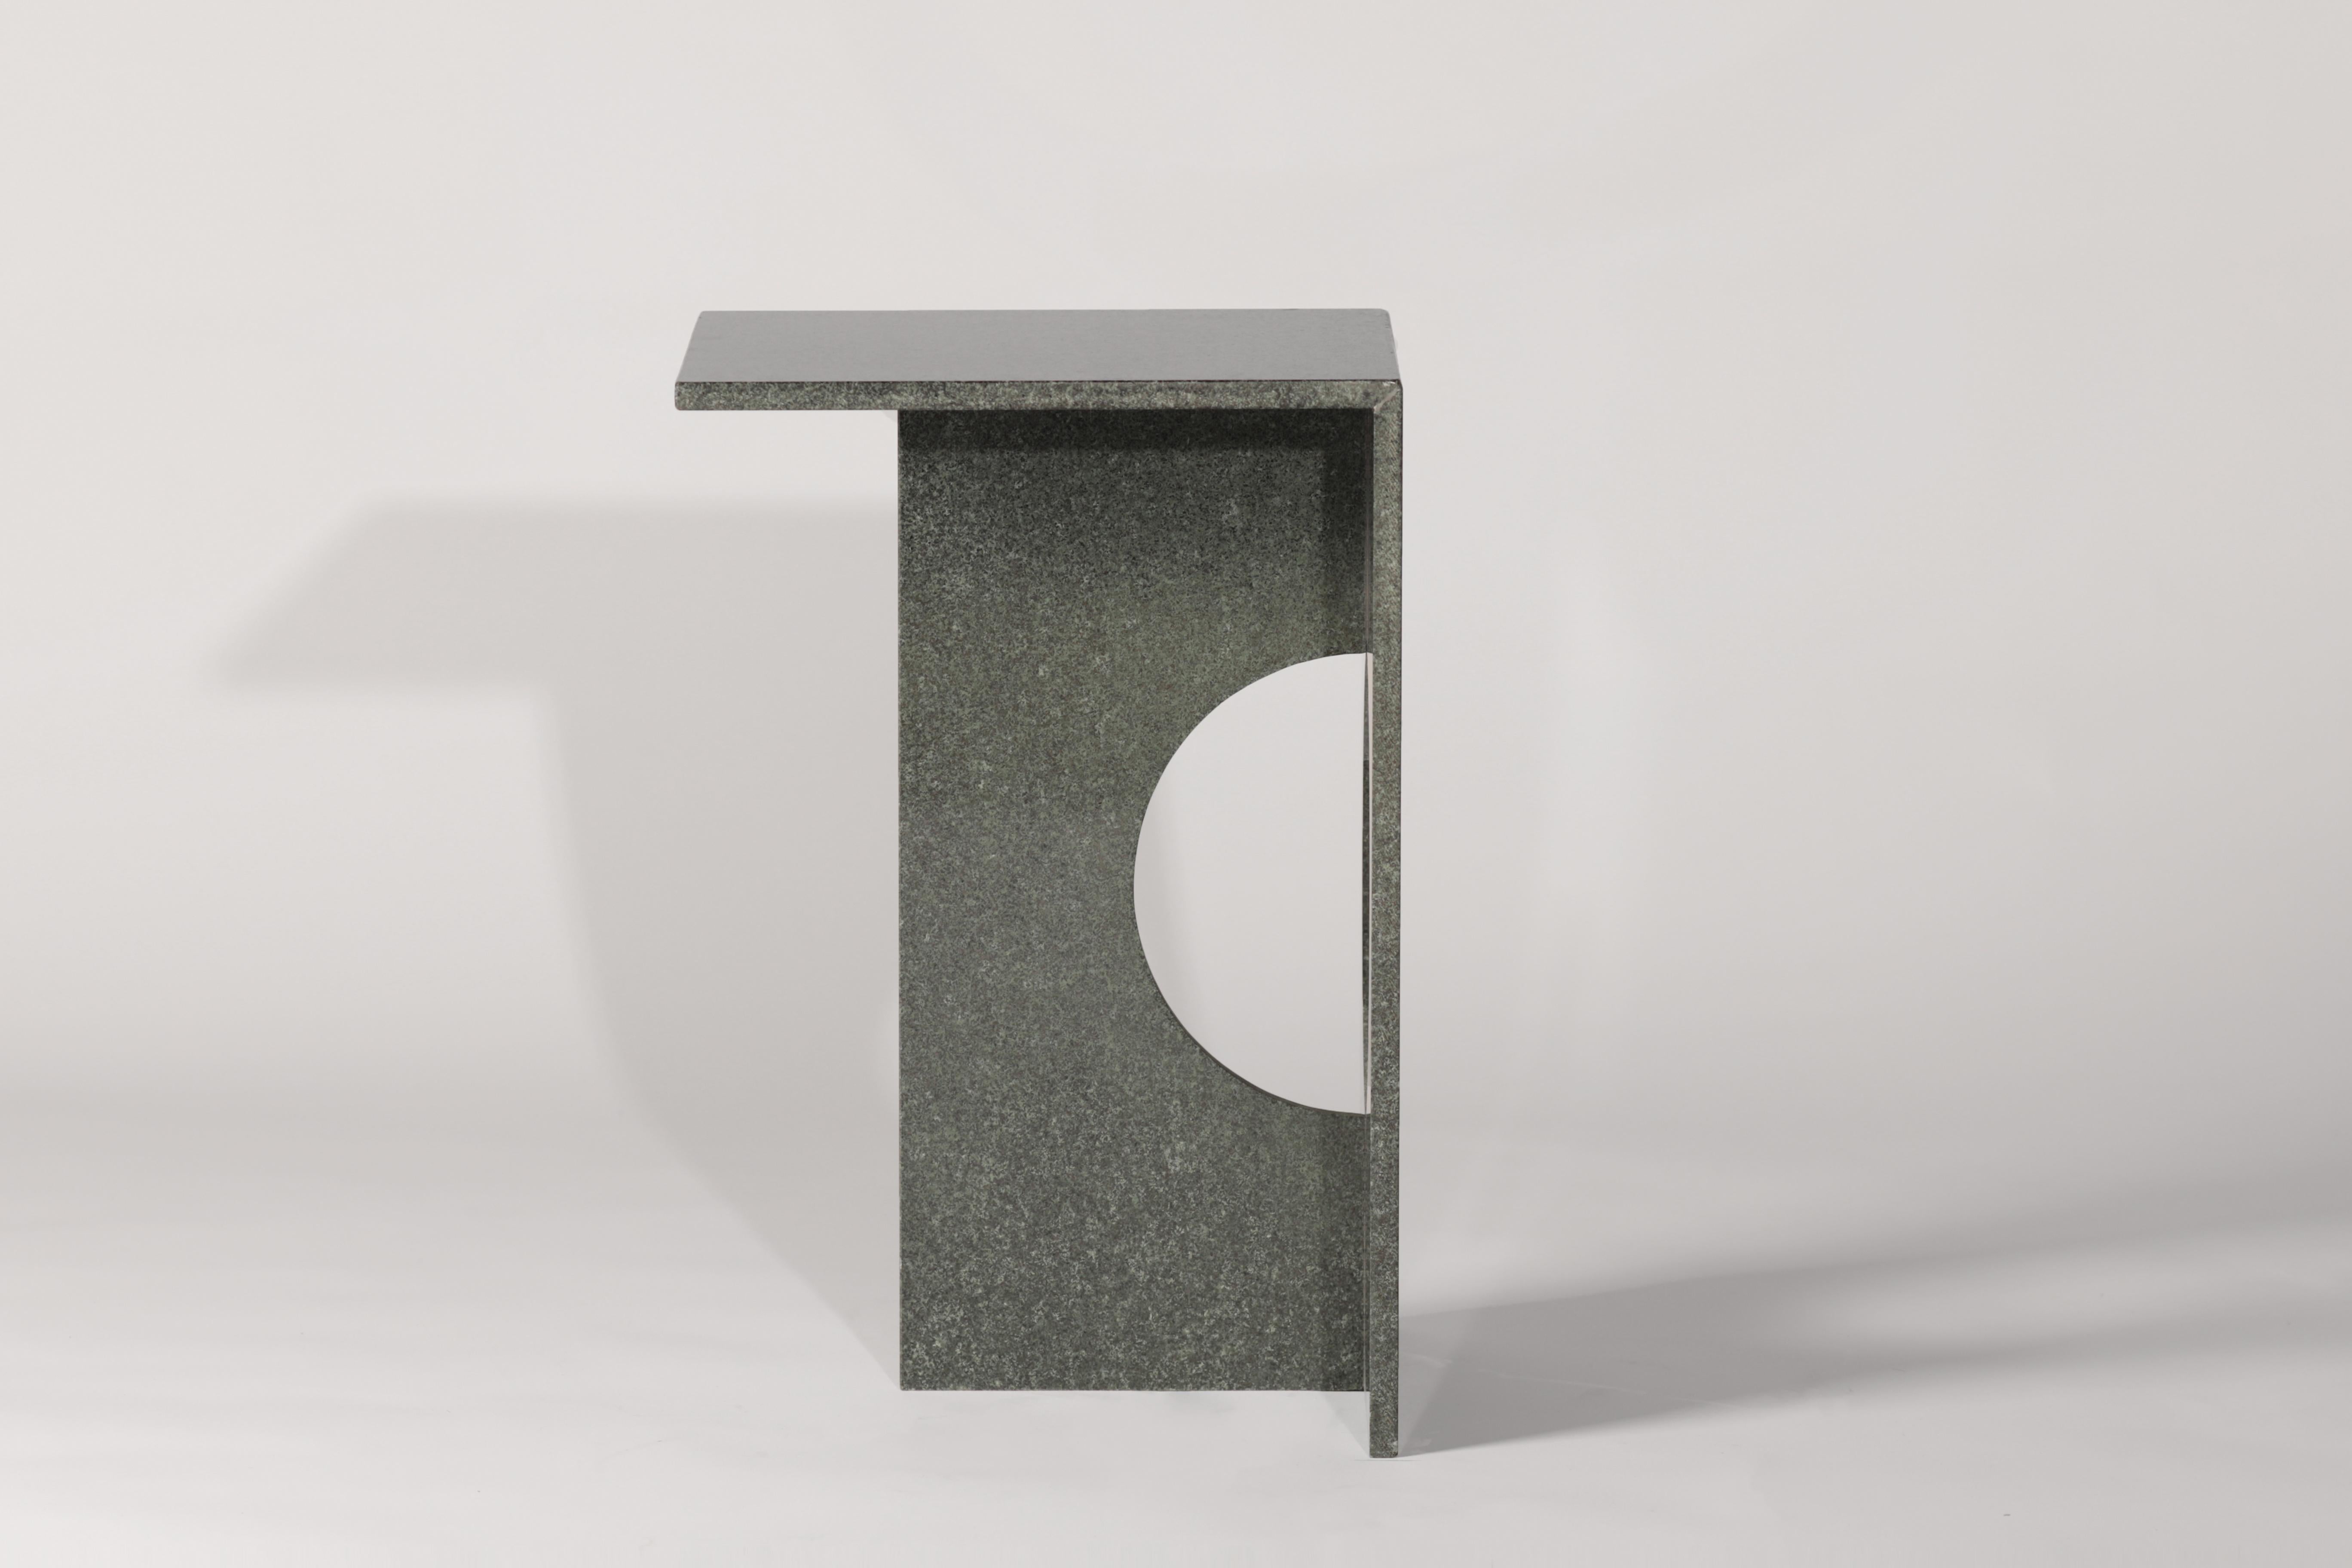 A side table made entirely from natural diabase stone makes this piece like a modern sculpture. Ola side table can be made from green diabase stone or diffferent marbles if required. Perfection of machine cut blends with handmade touches at the